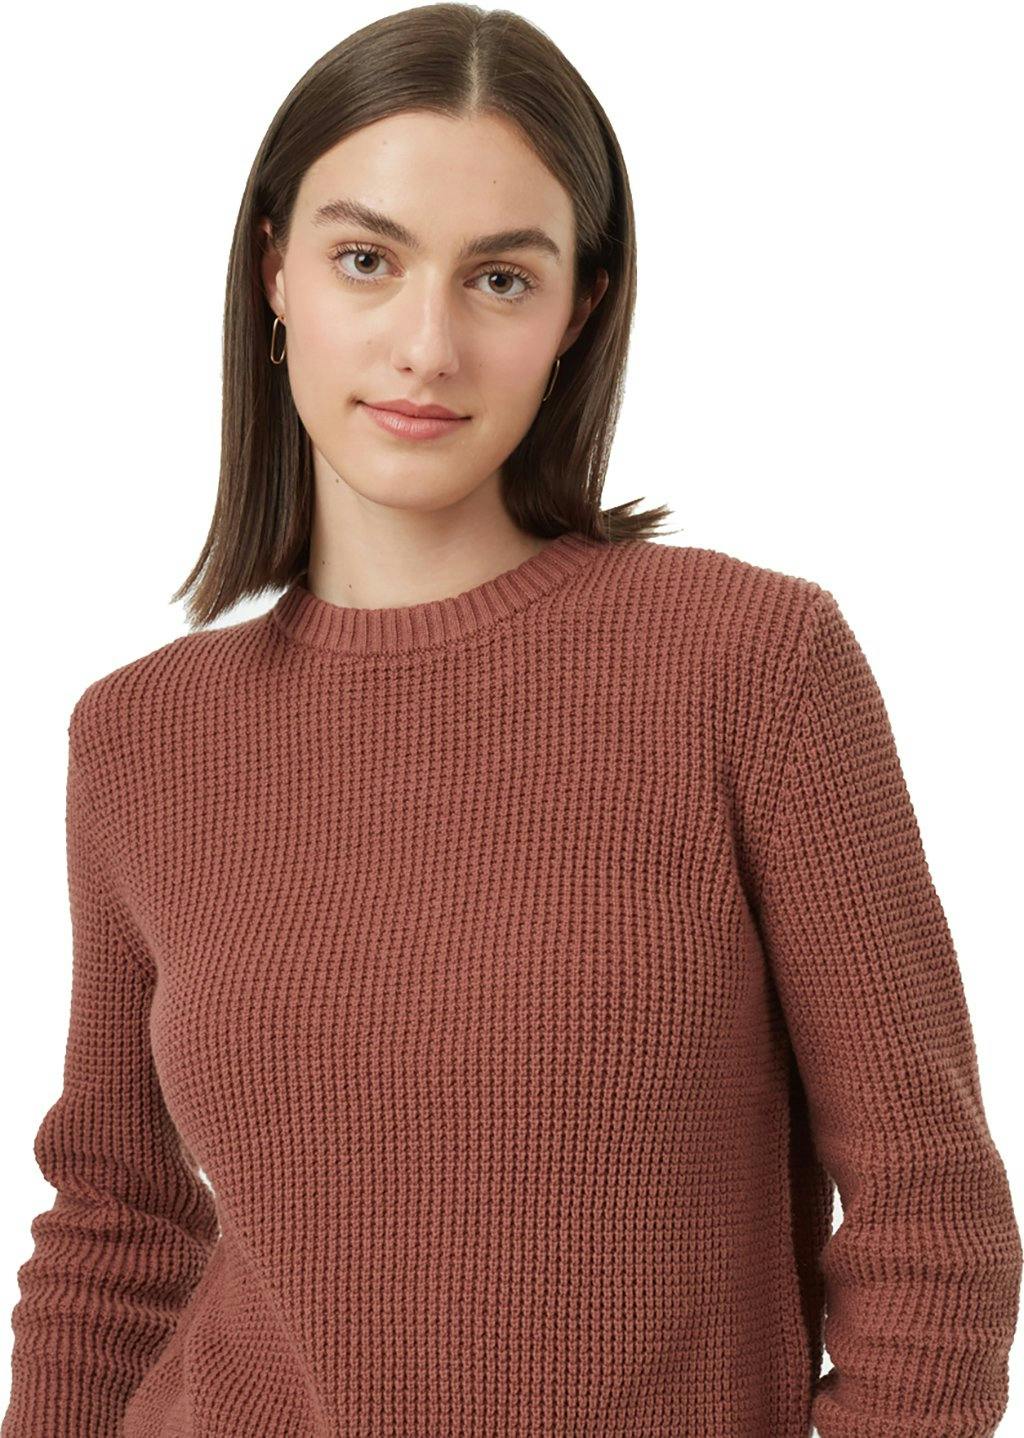 Product image for Highline Crew Sweater - Women's